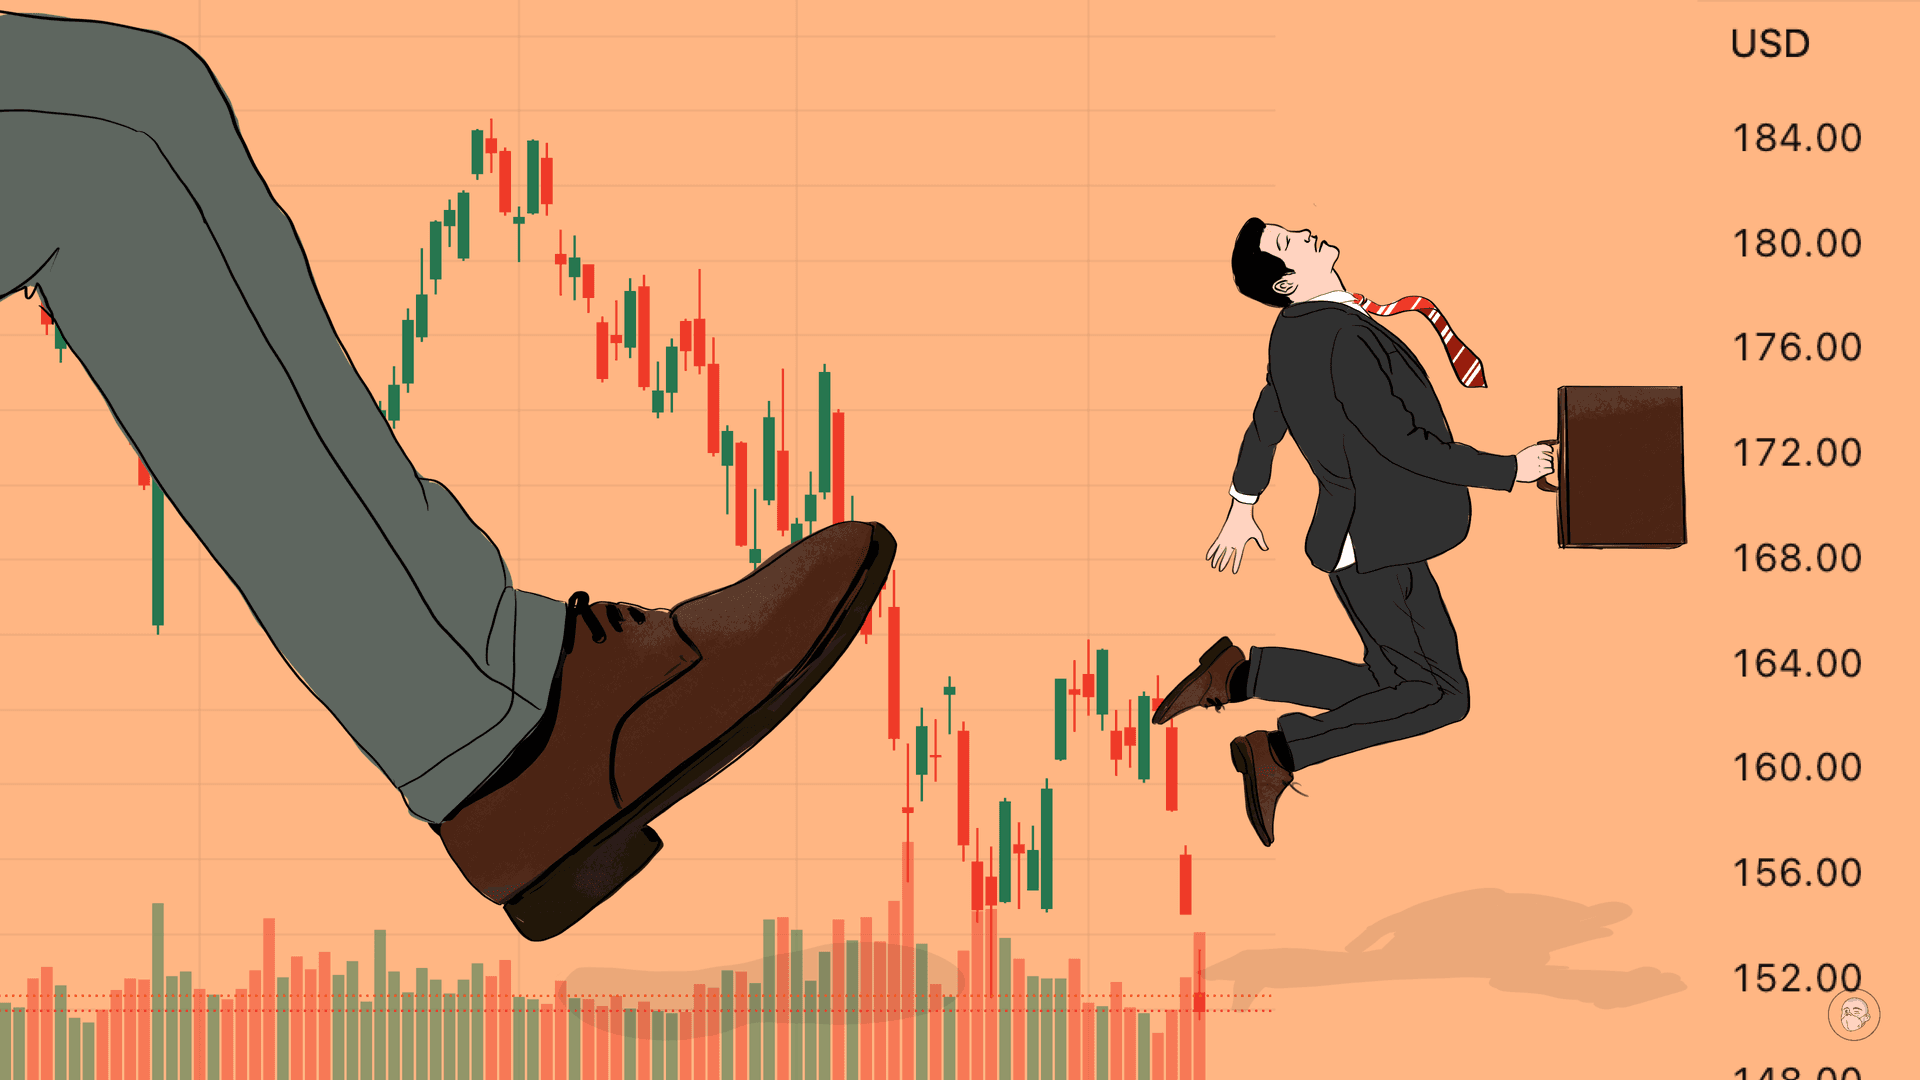 An illustration by Alex Santafe depicting a stock exchange graph with a man being kicked out by a giant foot